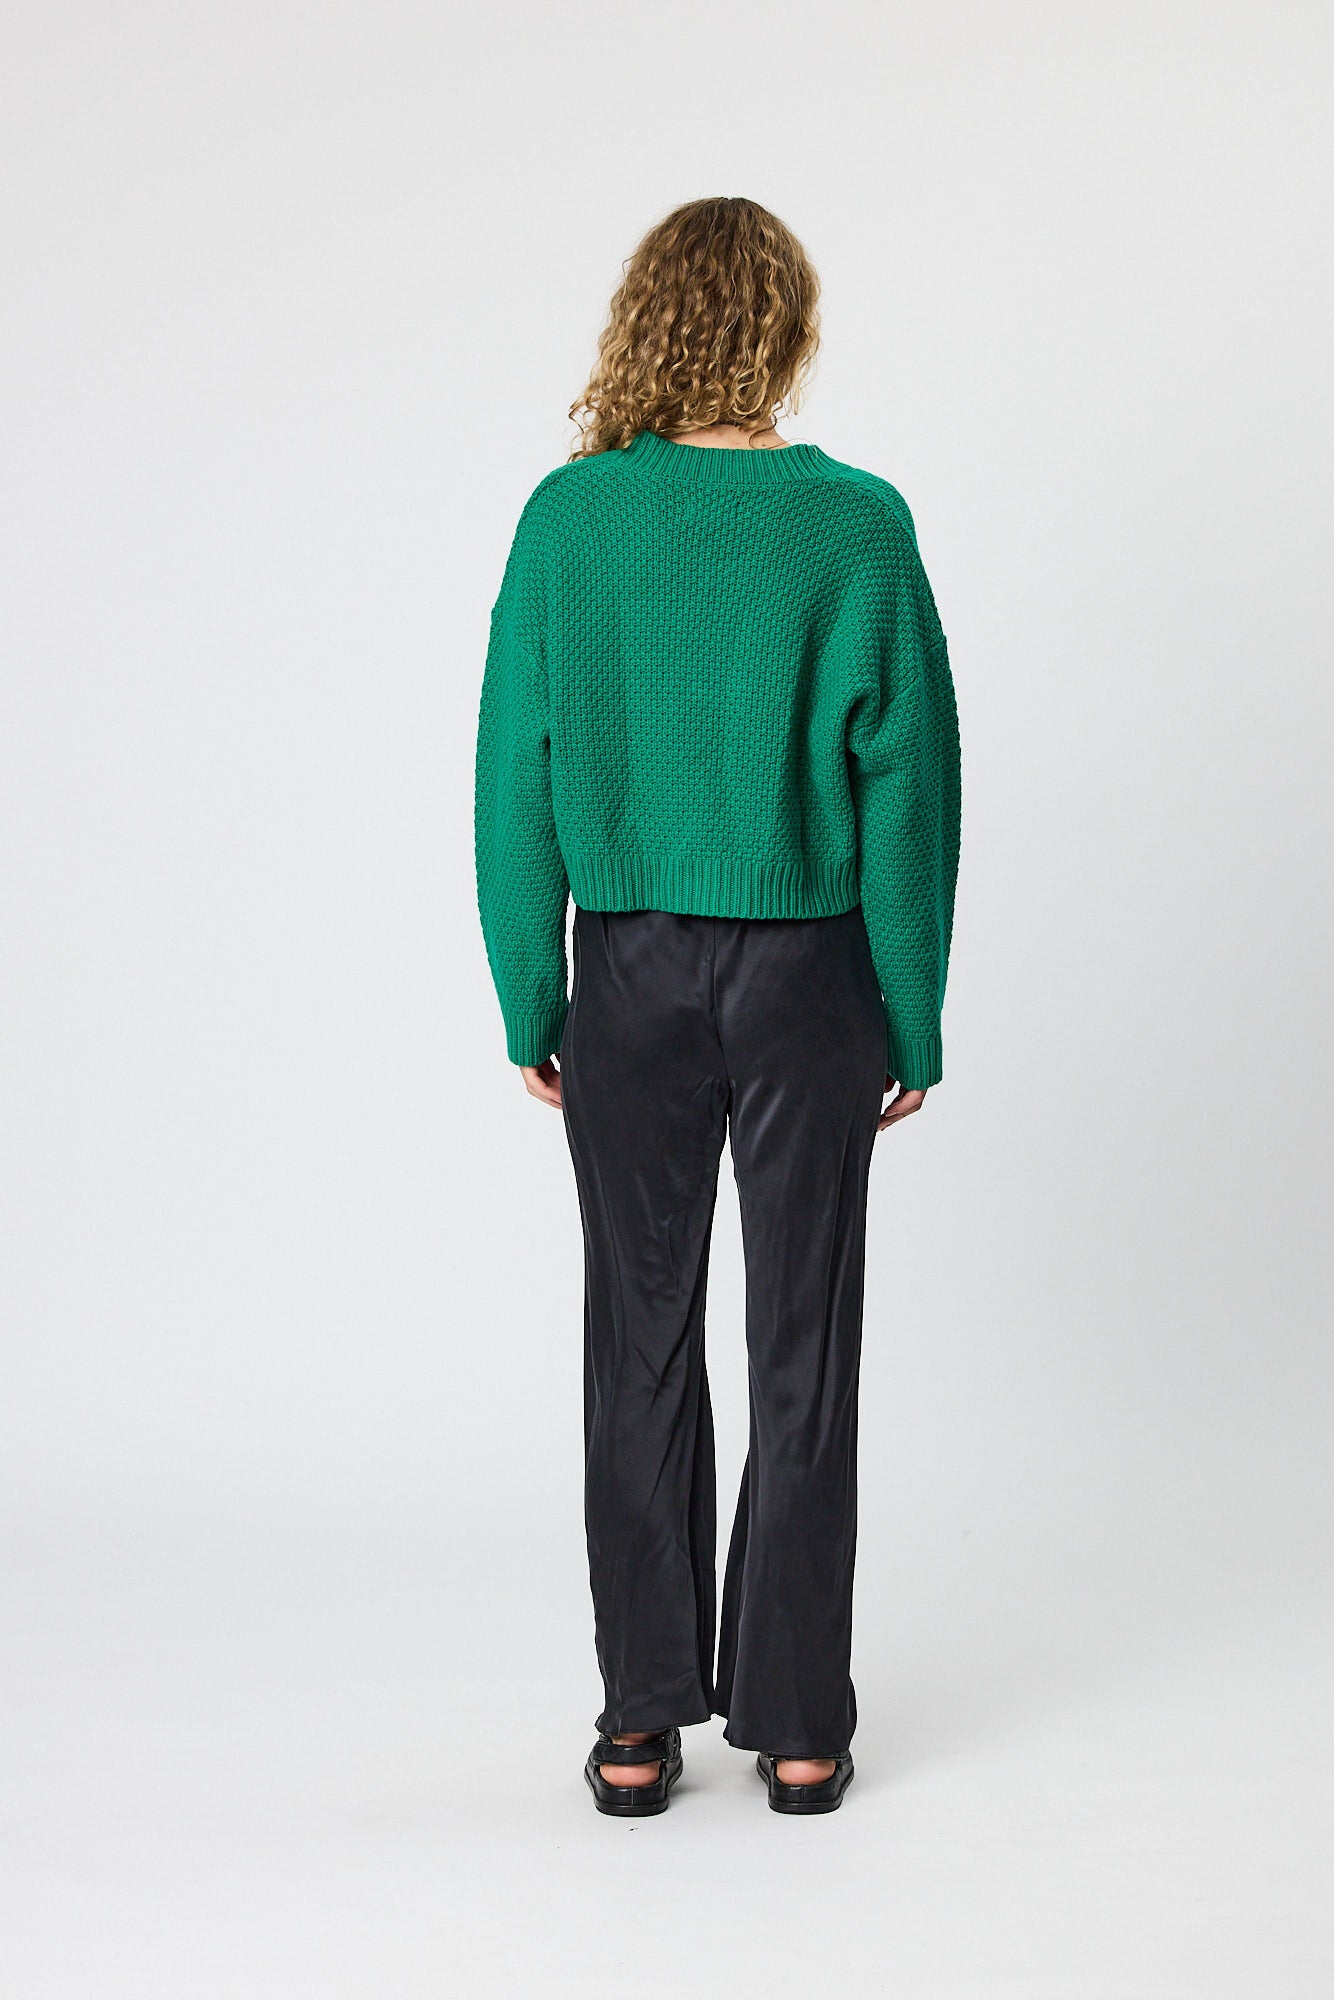 REMAIN // Milly Knit Cardi EMERALD